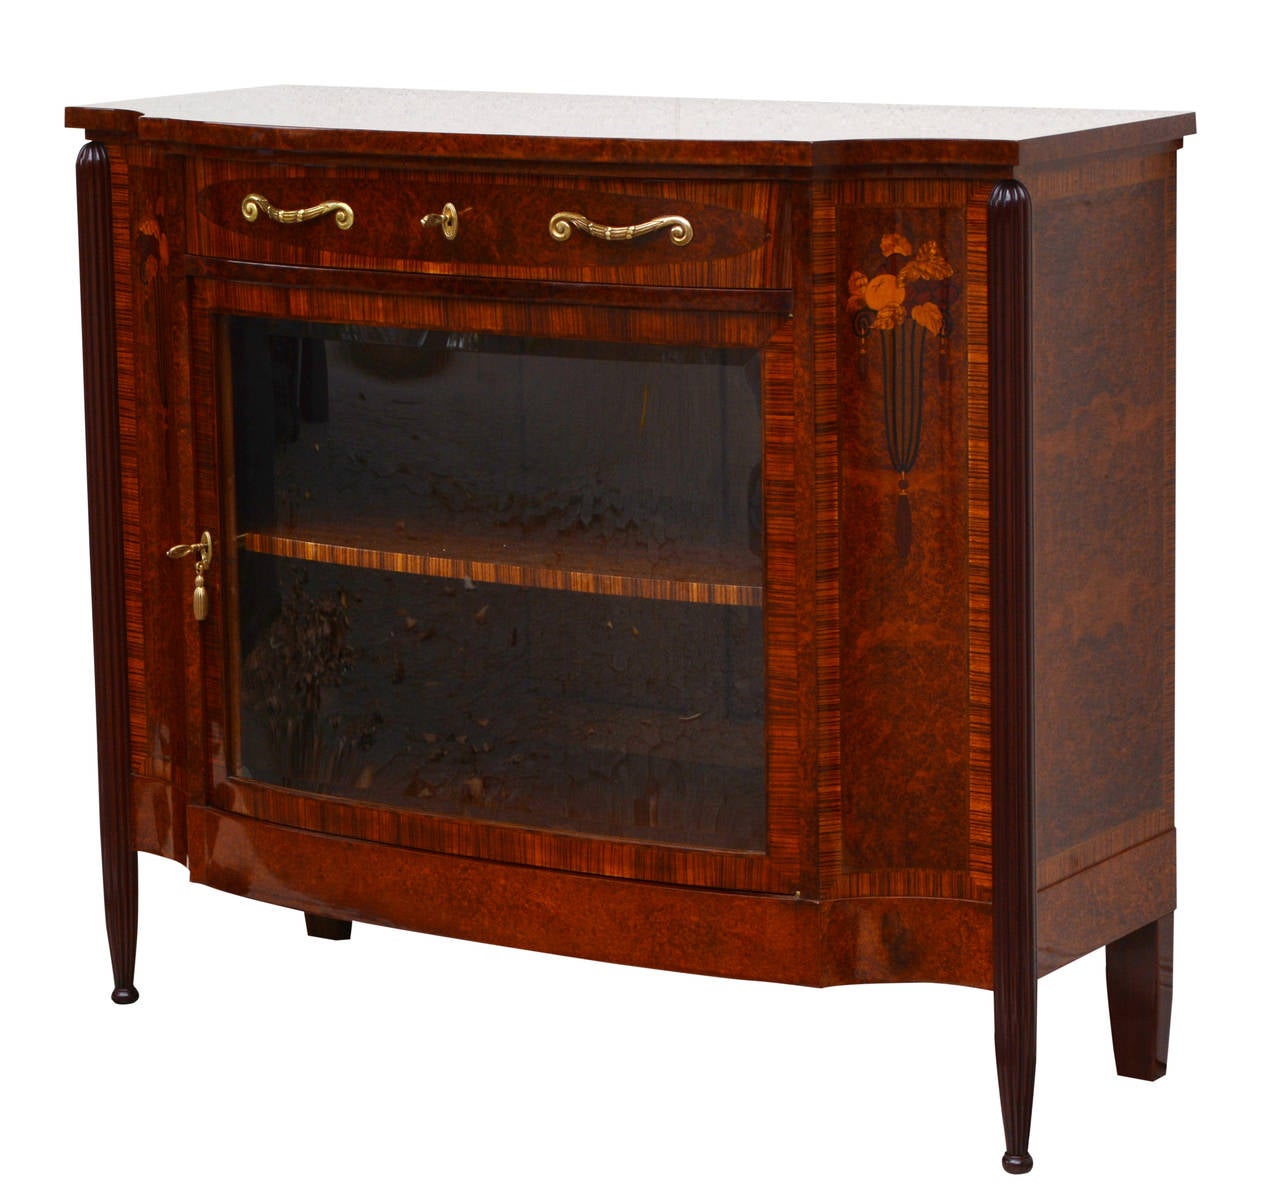 Art Deco Art Déco Period Sideboard Attributed to Paul Follot, Paris 1920s For Sale